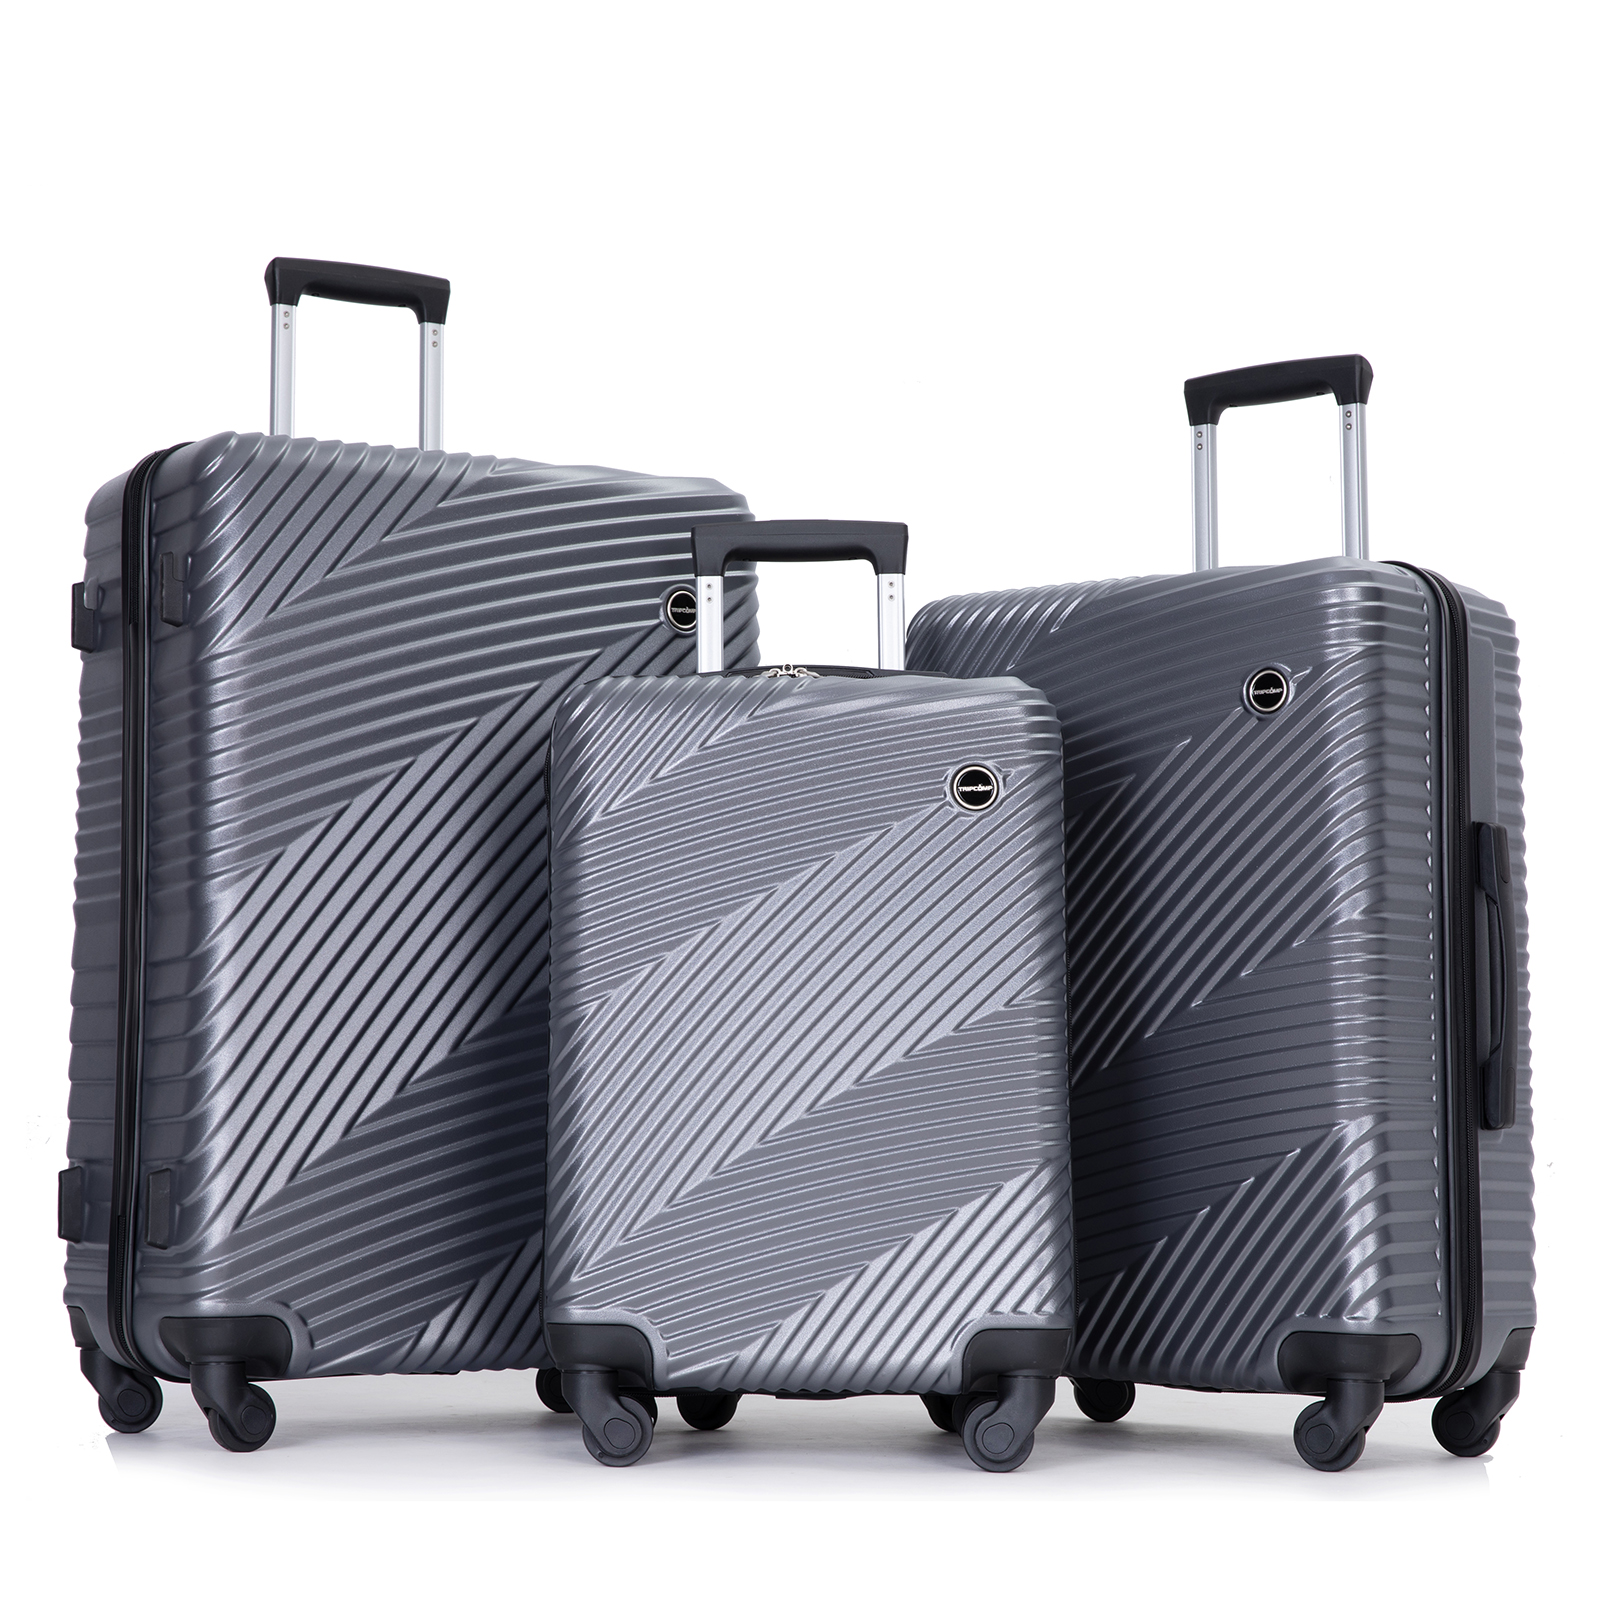 Tripcomp Luggage 3 Piece Set,Suitcase Set with Spinner Wheels Hardside Lightweight Luggage Set 20in24in28in.(Dark Grey) - image 1 of 7